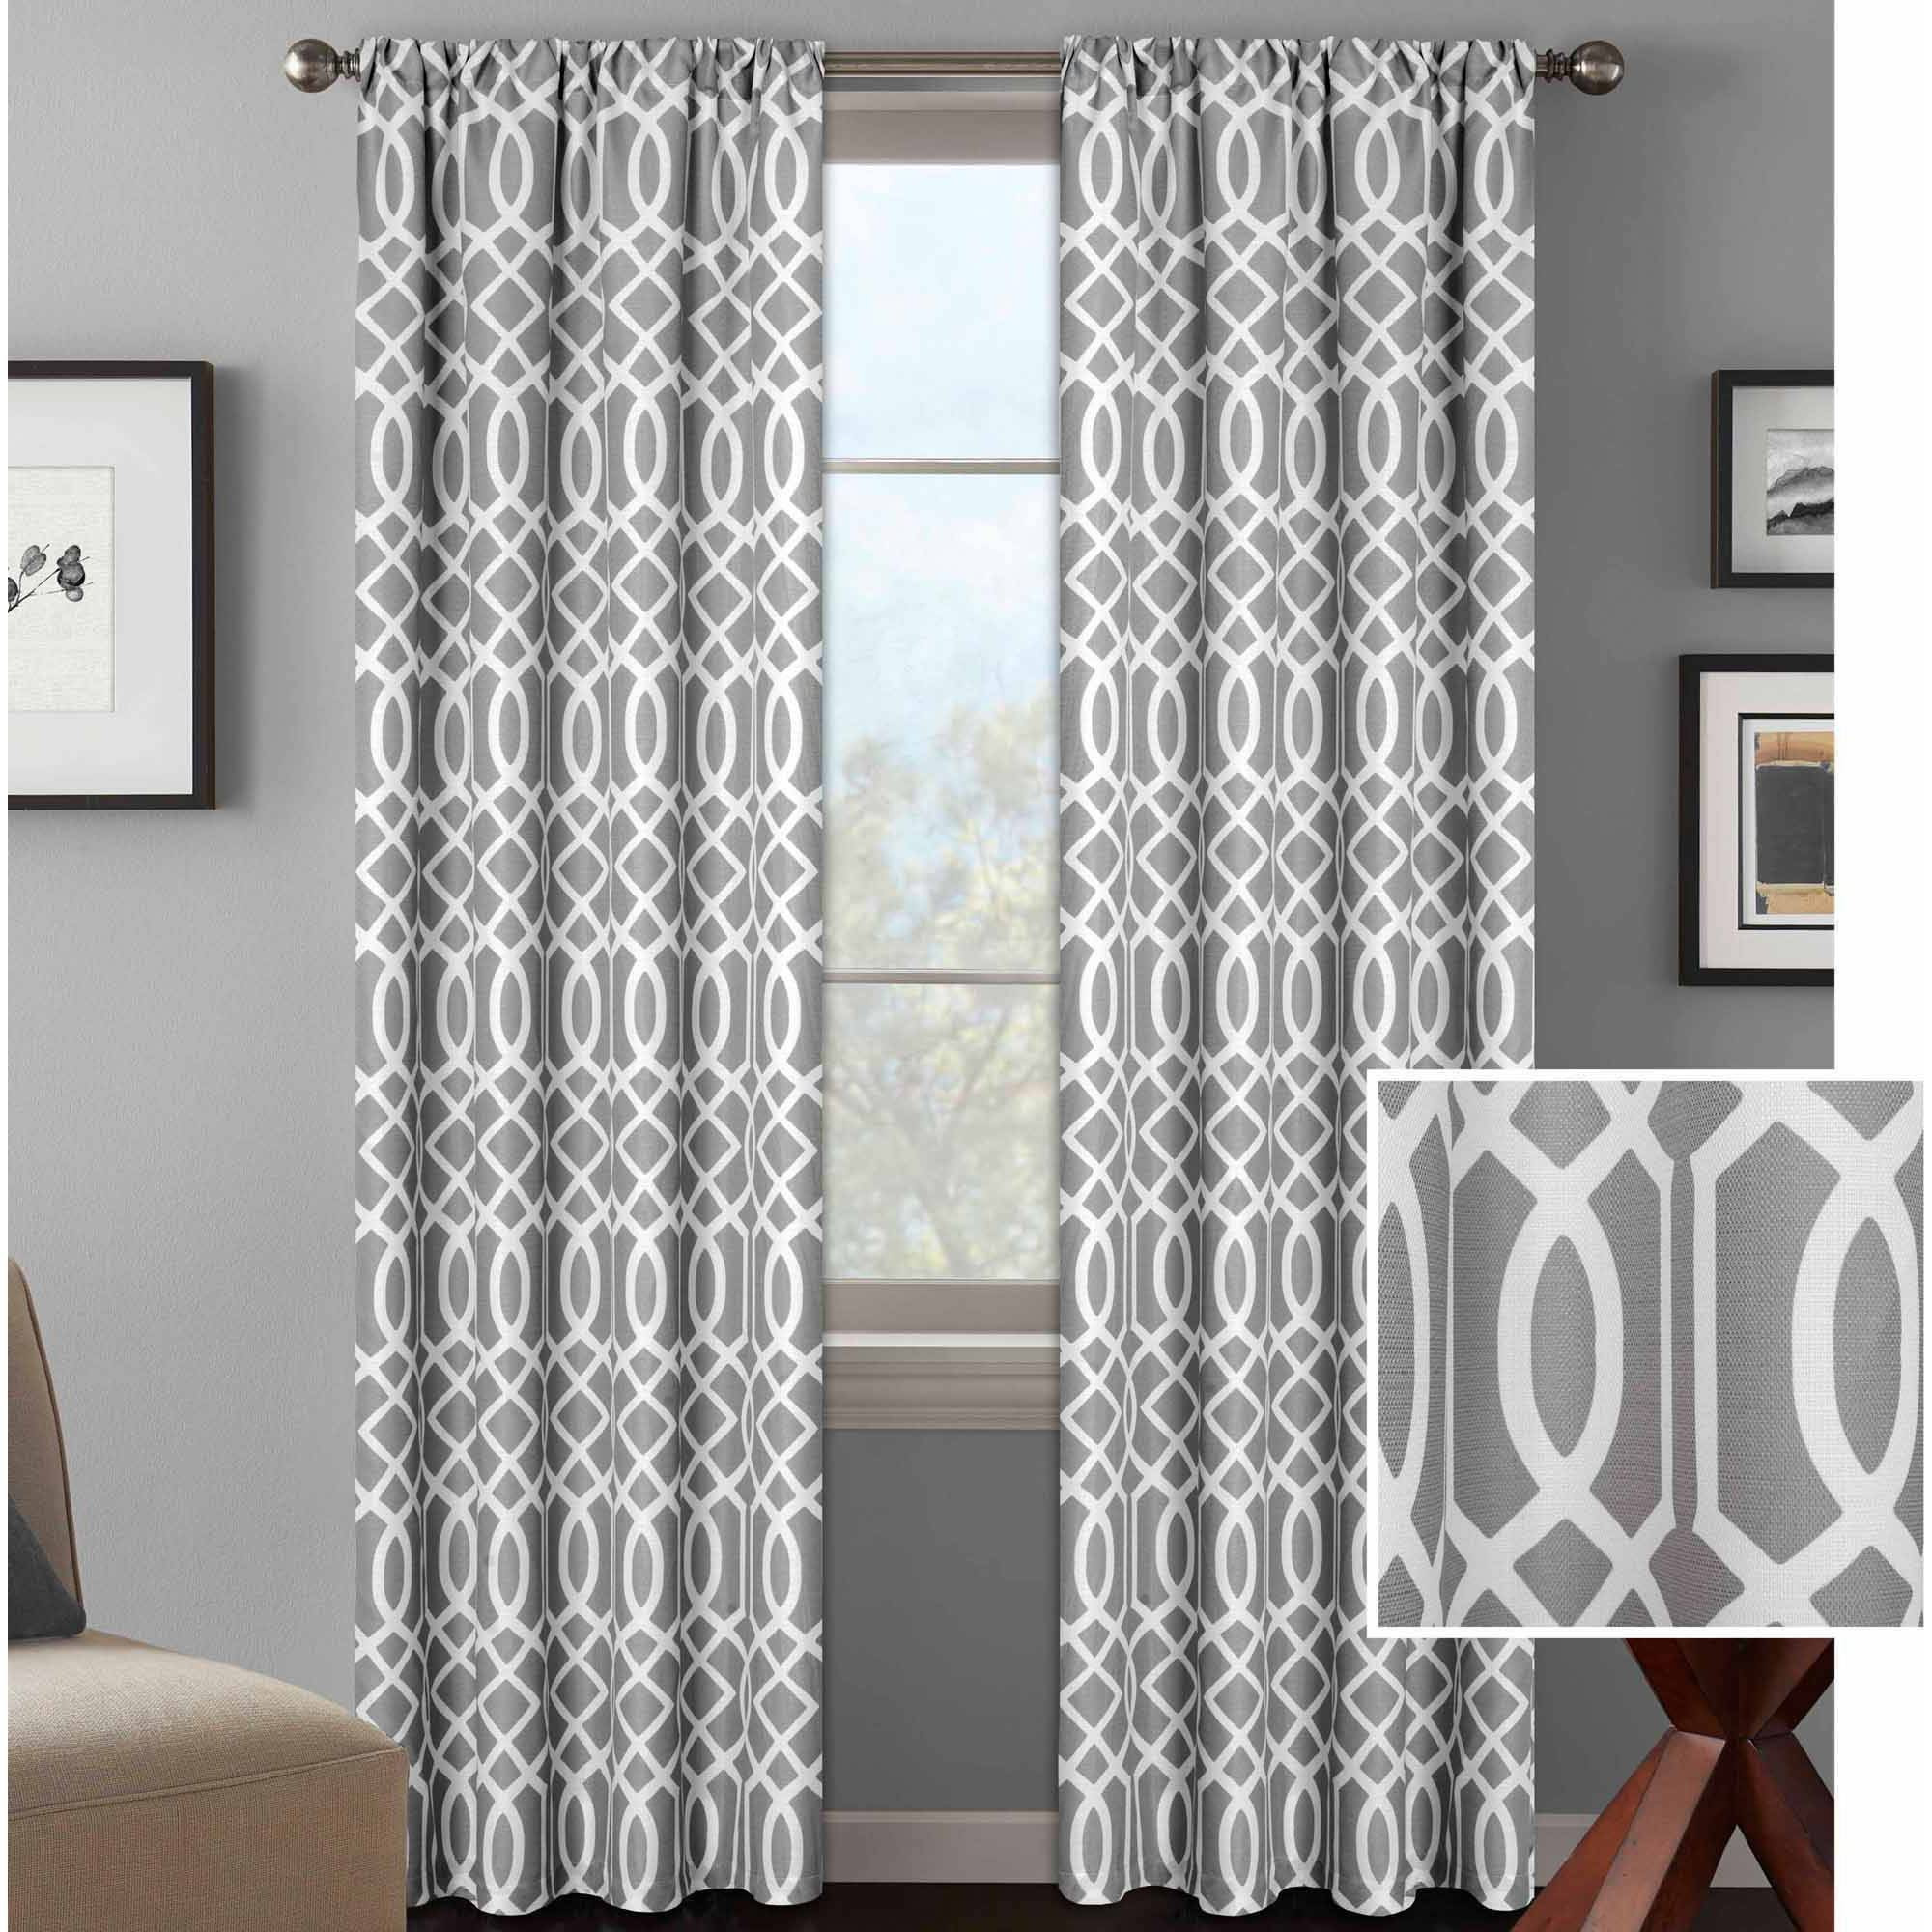 Walmart Curtains For Living Room
 Bathroom Wondrous Shower Curtain Walmart With Alluring